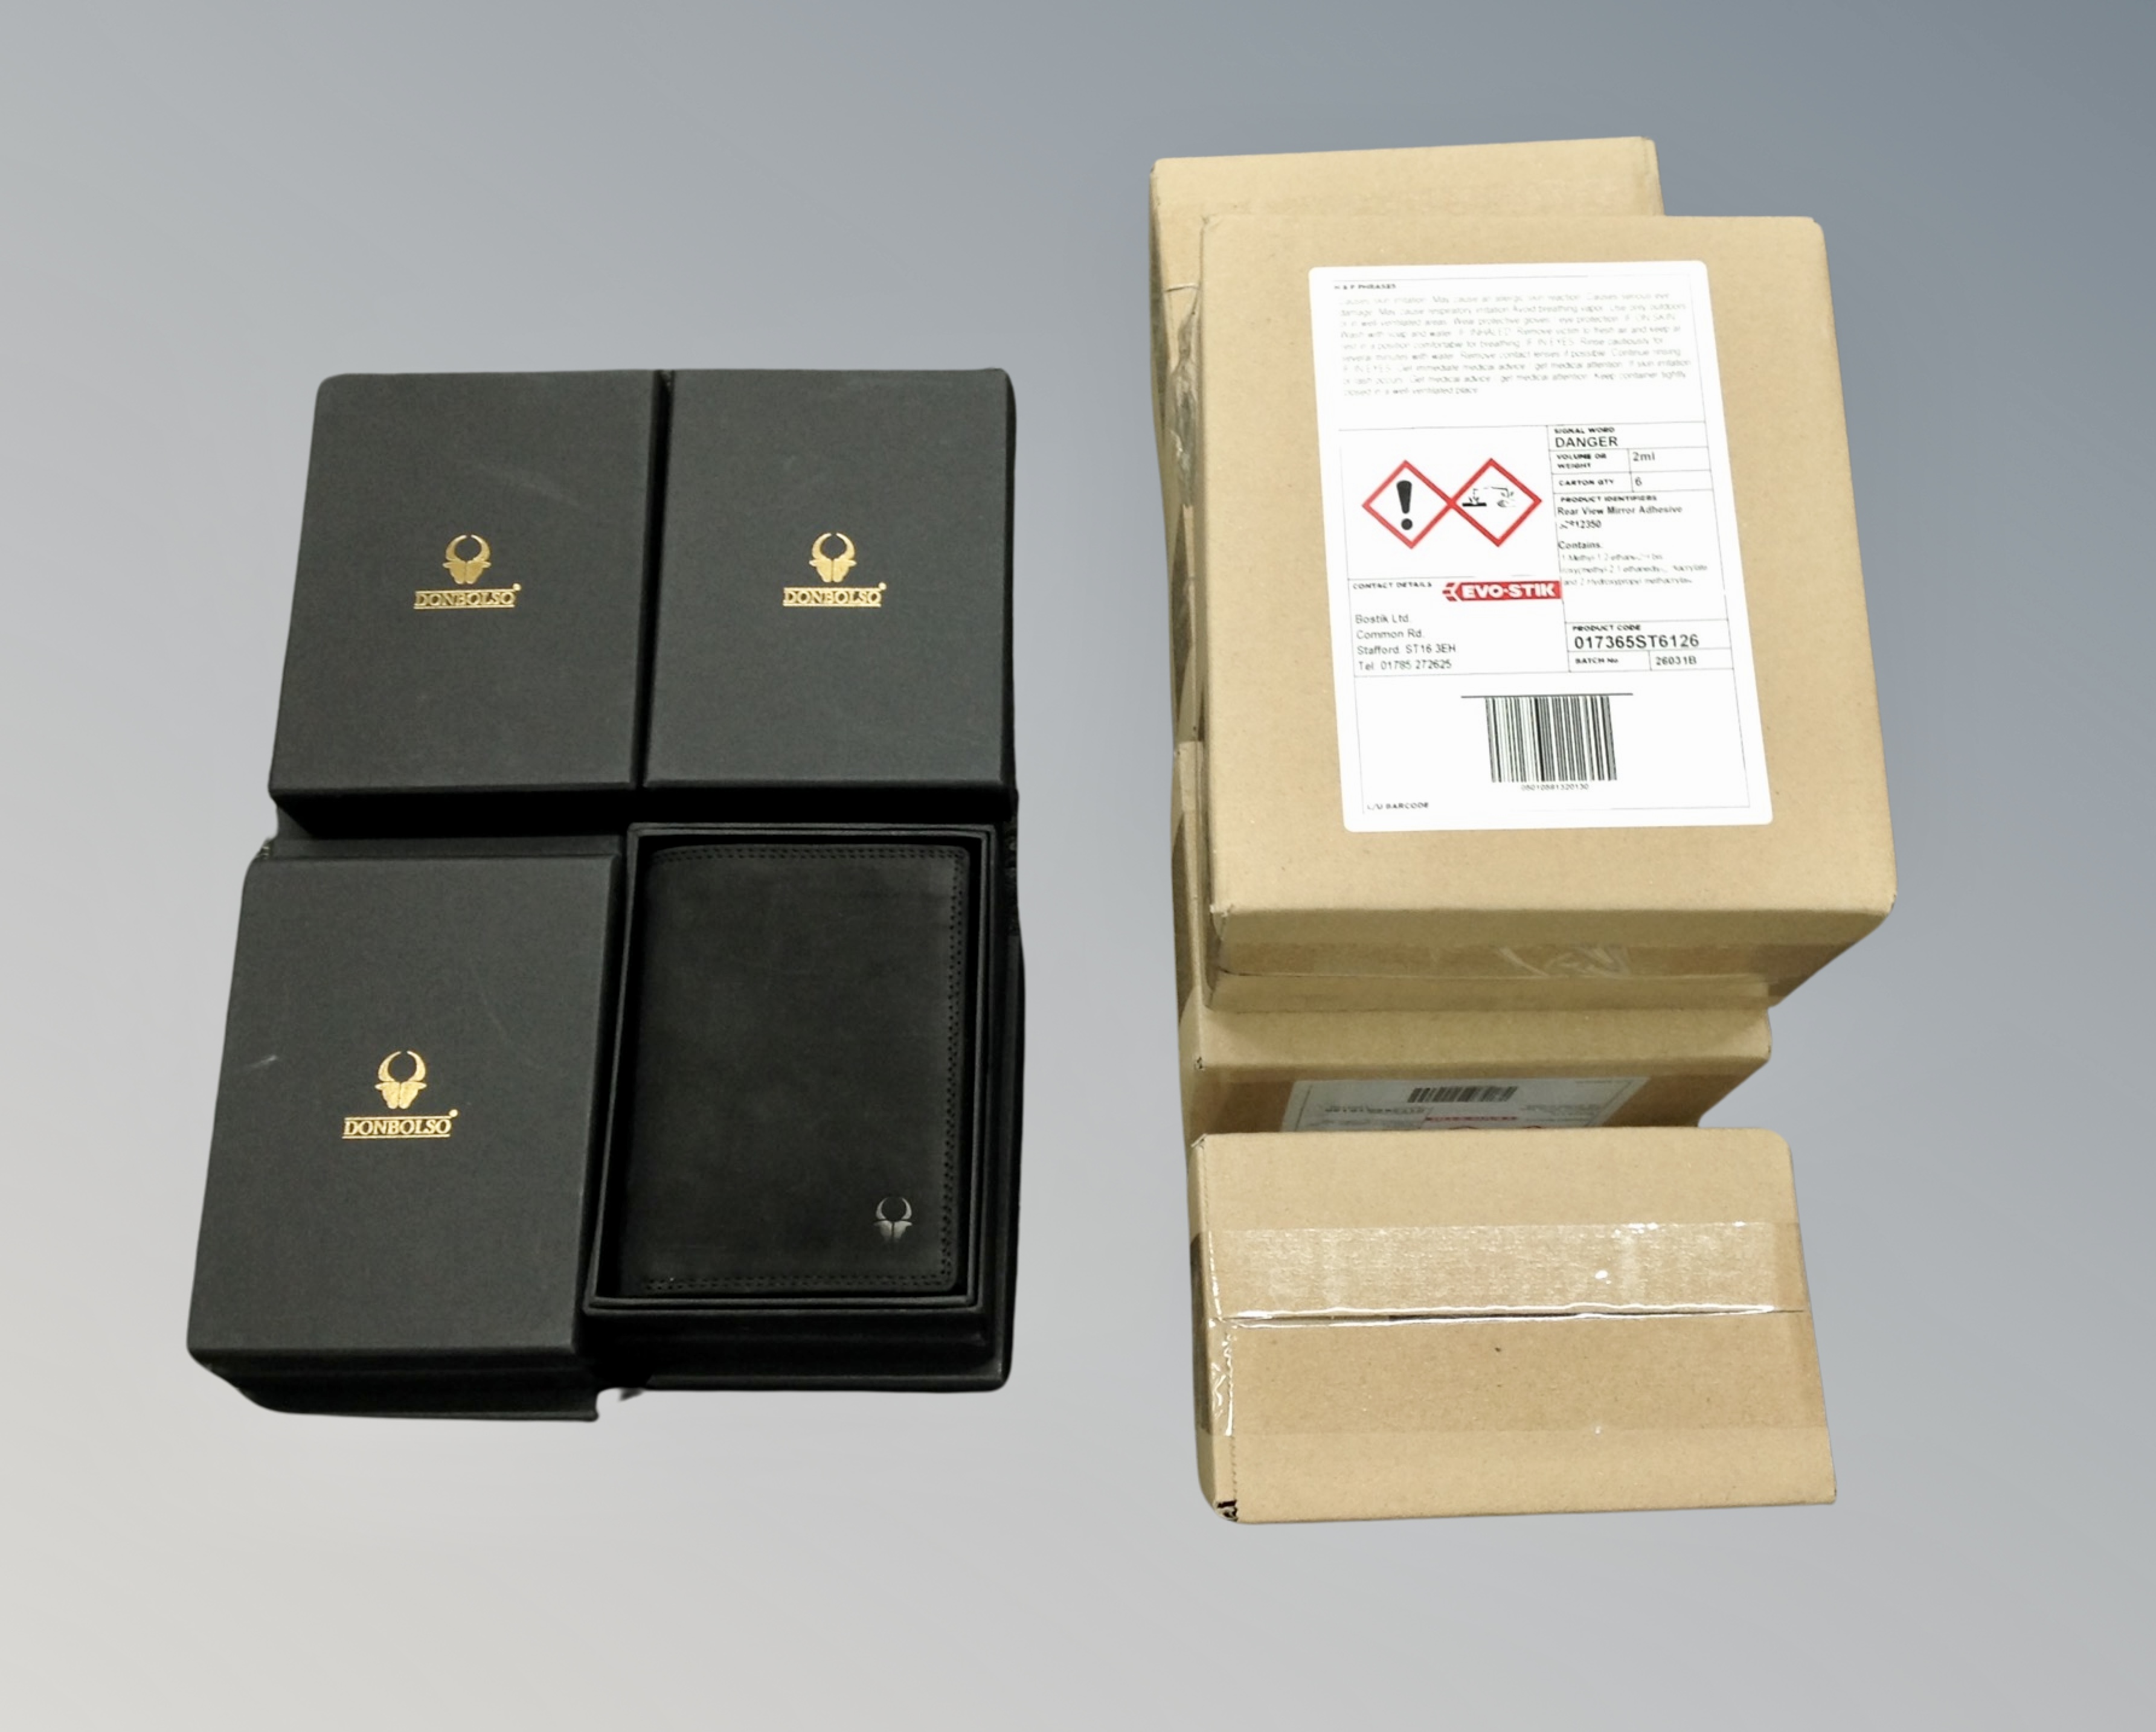 A box of twelve Dombolso leather wallets together with five boxes of Evo Stick rear view mirror